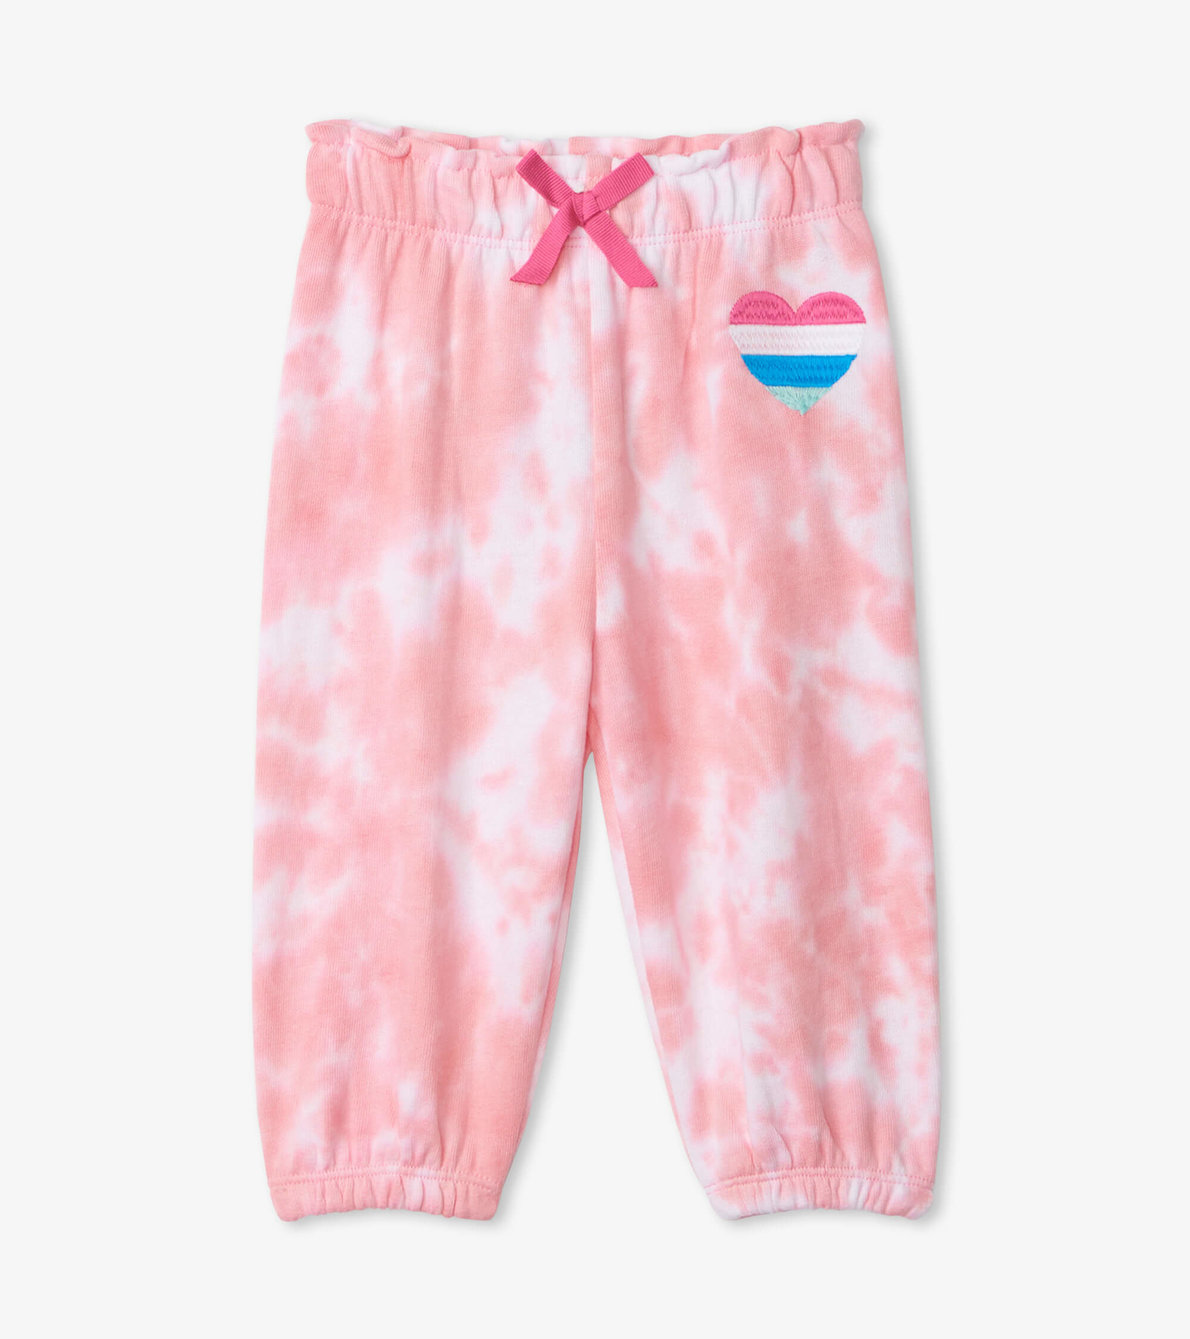 View larger image of Pink Tie Dye Baby Joggers